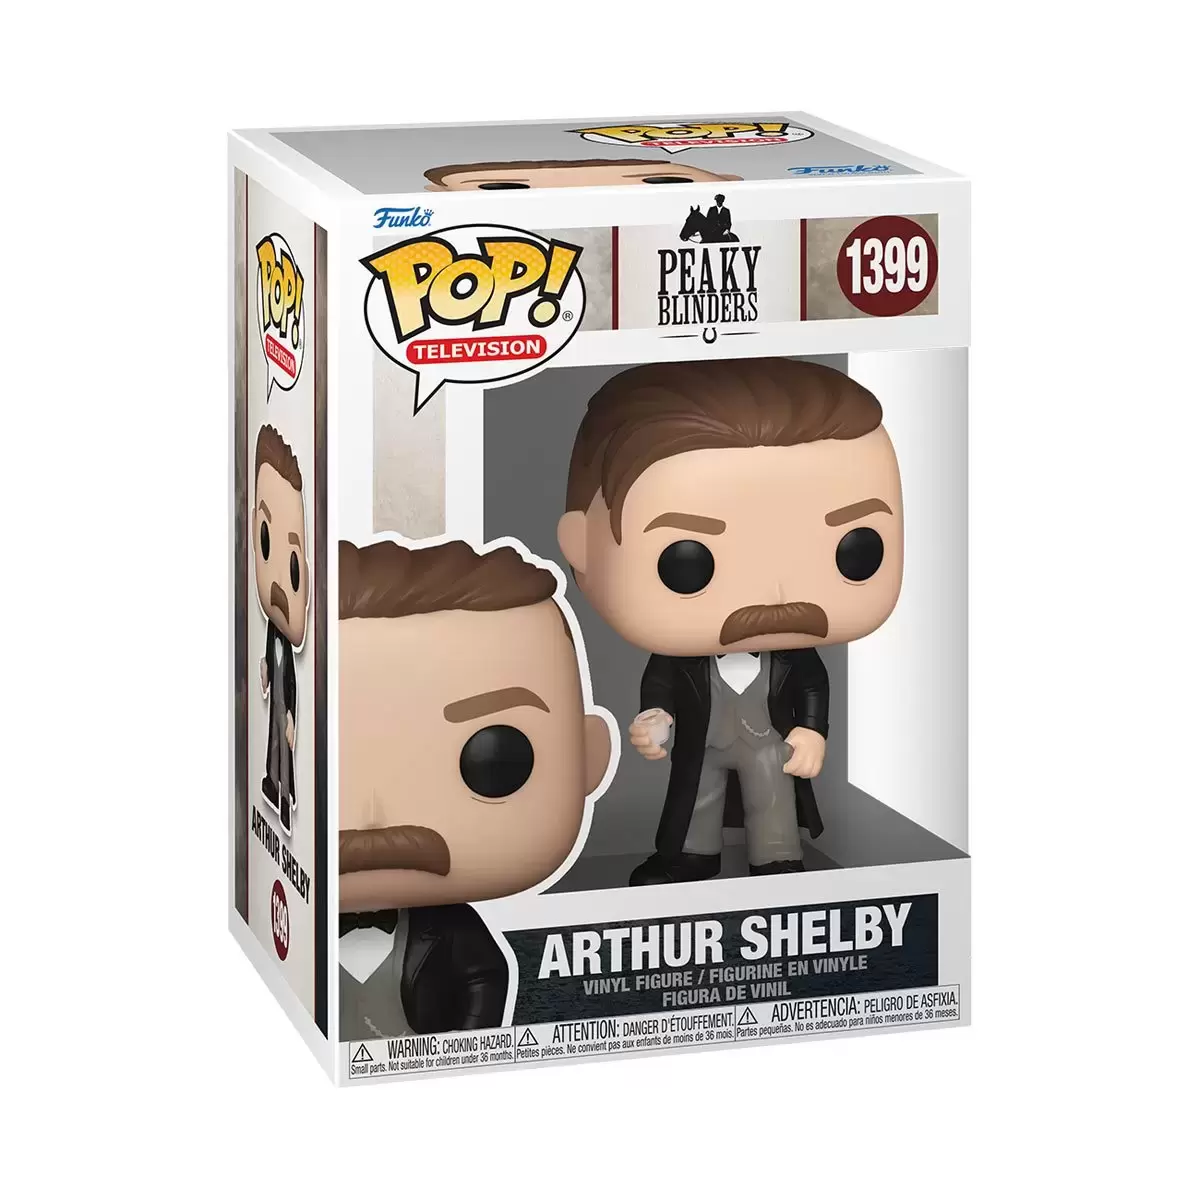 POP! Television - Peaky Blinders - Arthur Shelby